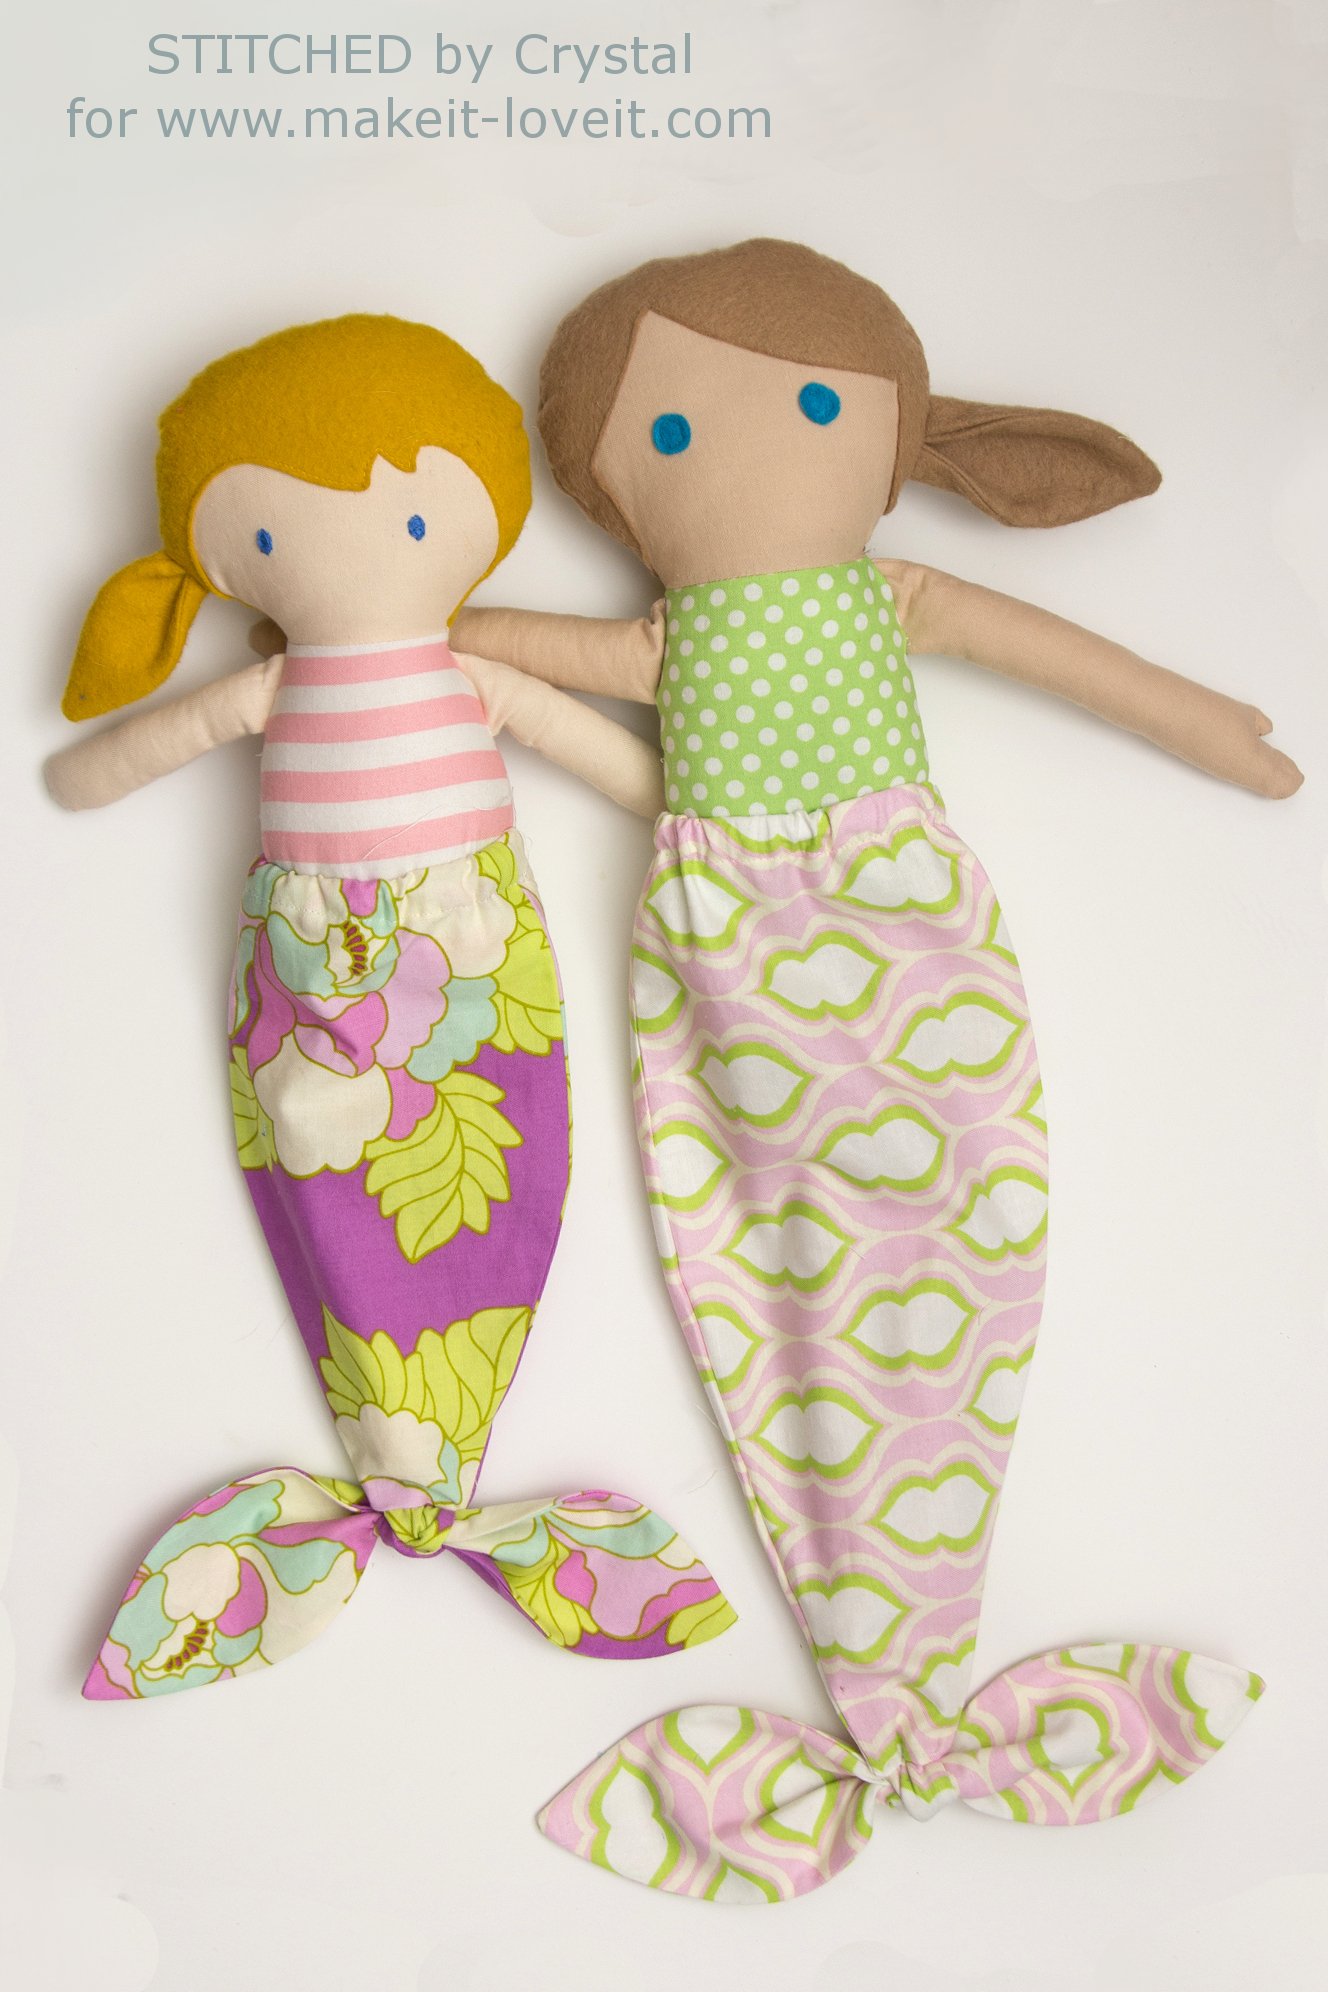 How to sew a mermaid tail for a doll!